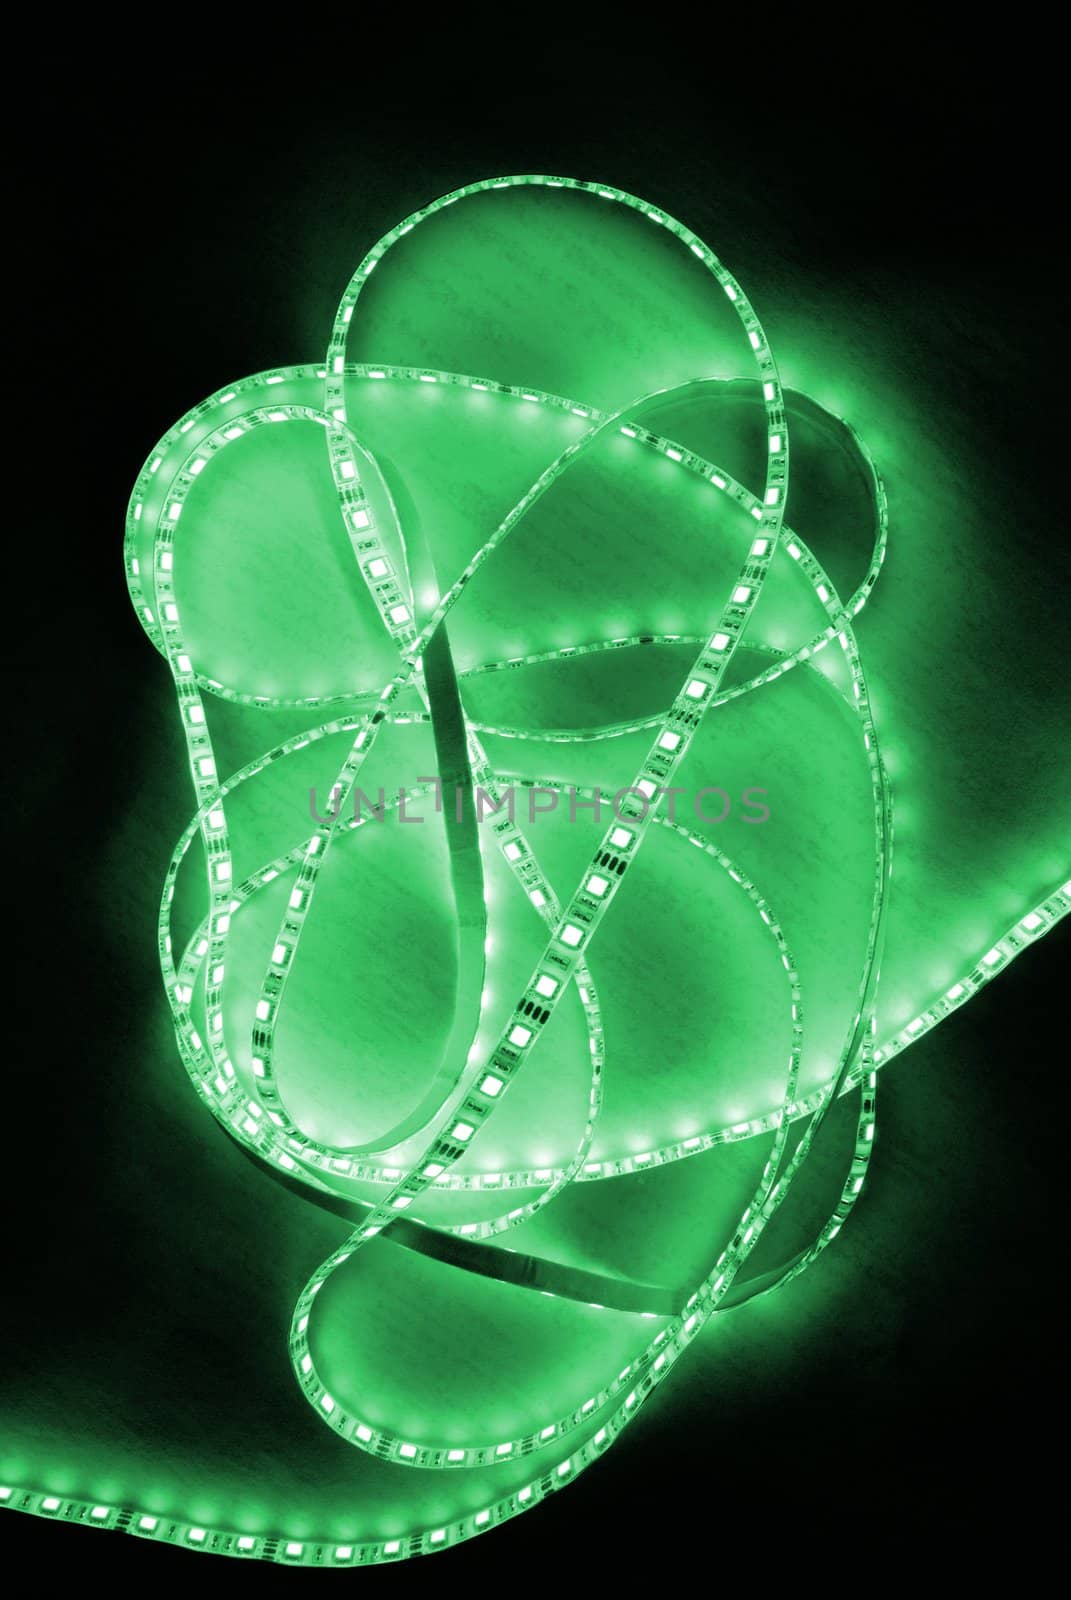 green led strip with a glue layer, background in the dark, illuminated by strip